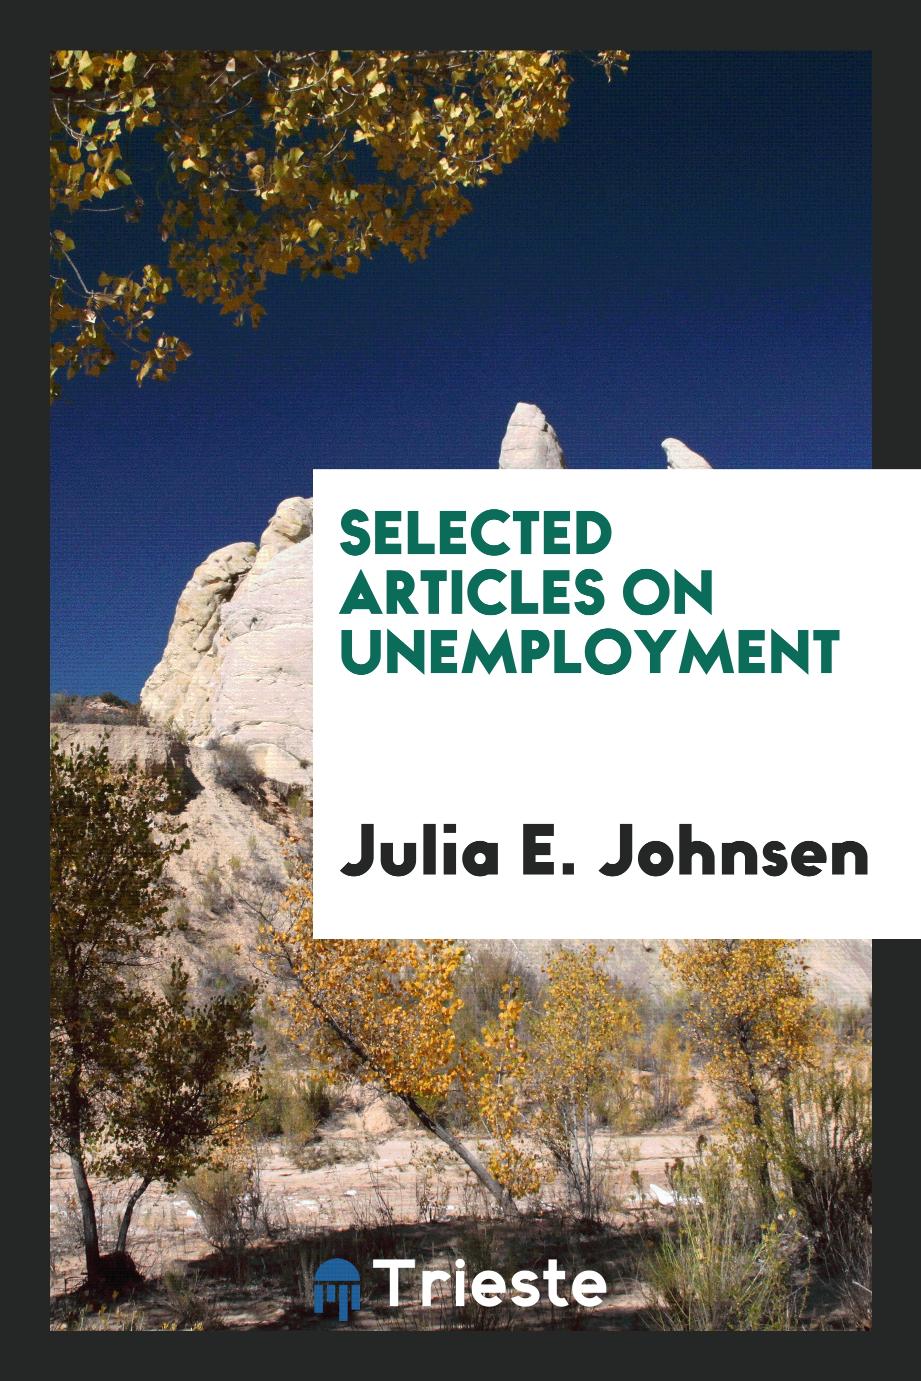 Selected articles on unemployment